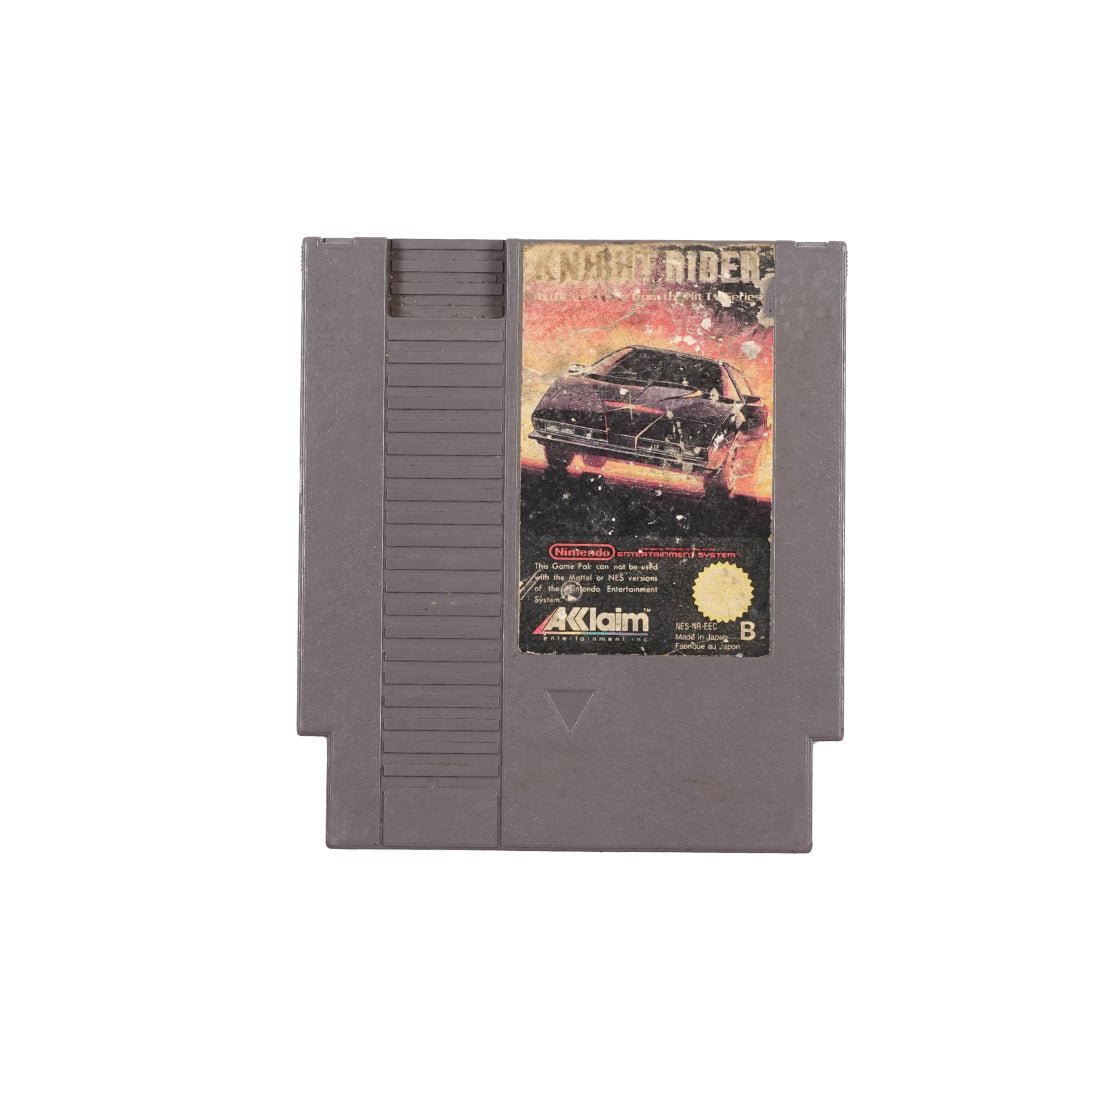 (Pre-Owned) Knight Rider - Nintendo Entertainment System - Store 974 | ستور ٩٧٤